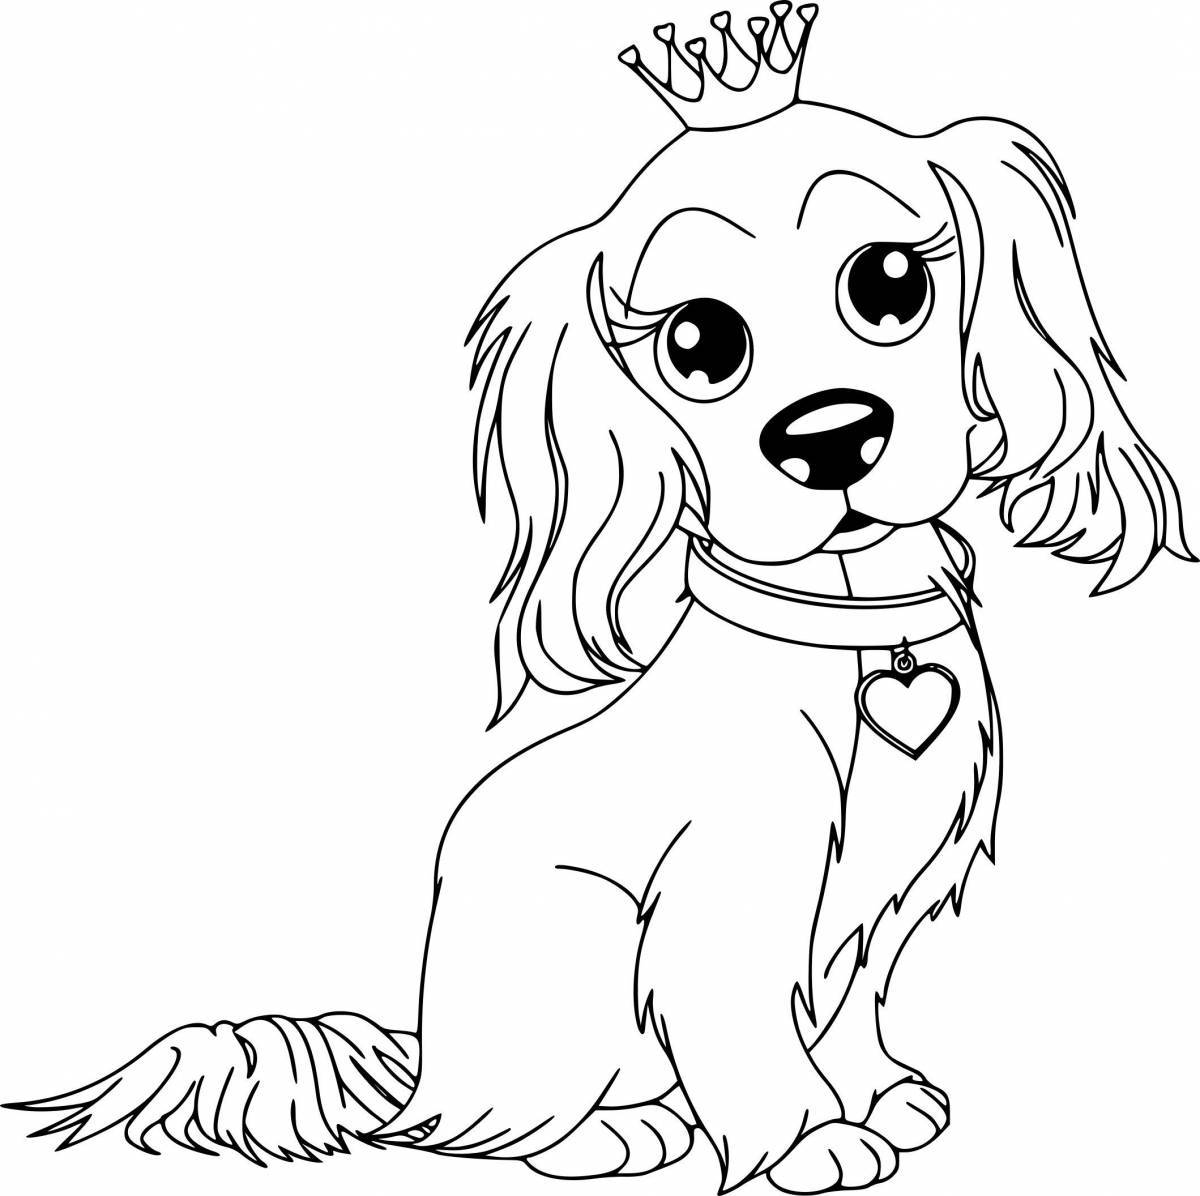 Fabulous dog coloring book for kids